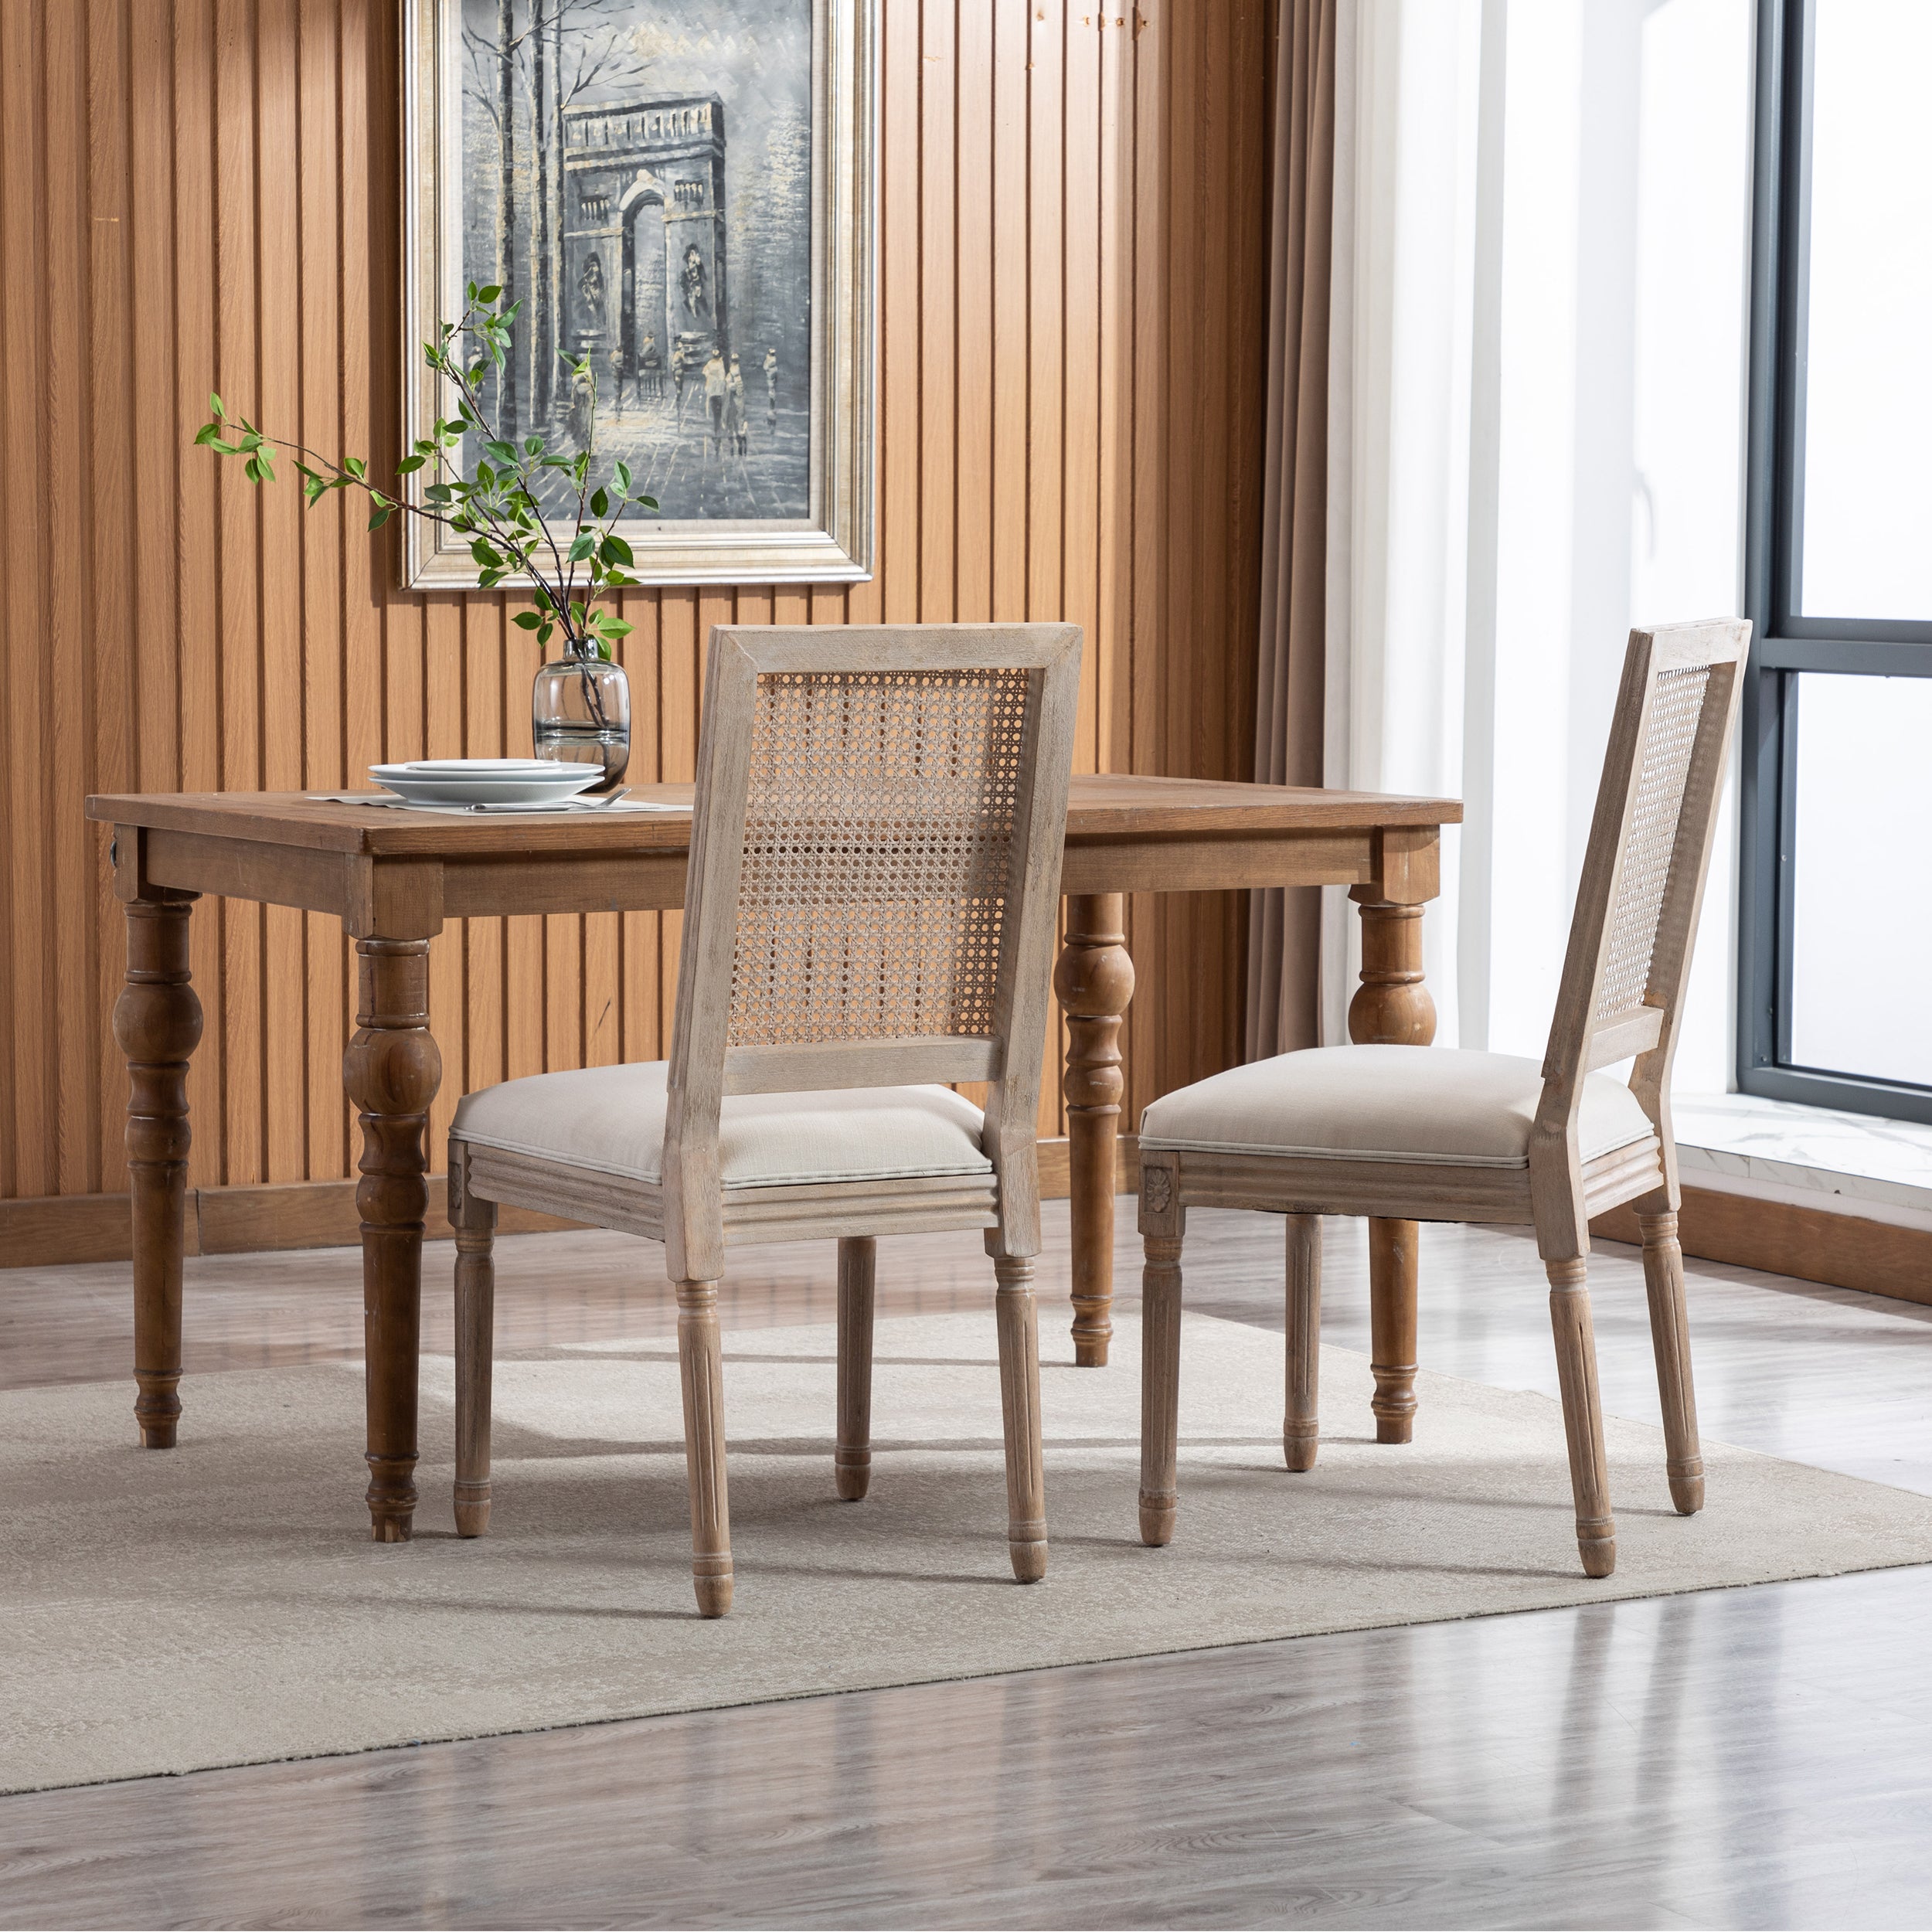 Linen Fabric Dining Chair